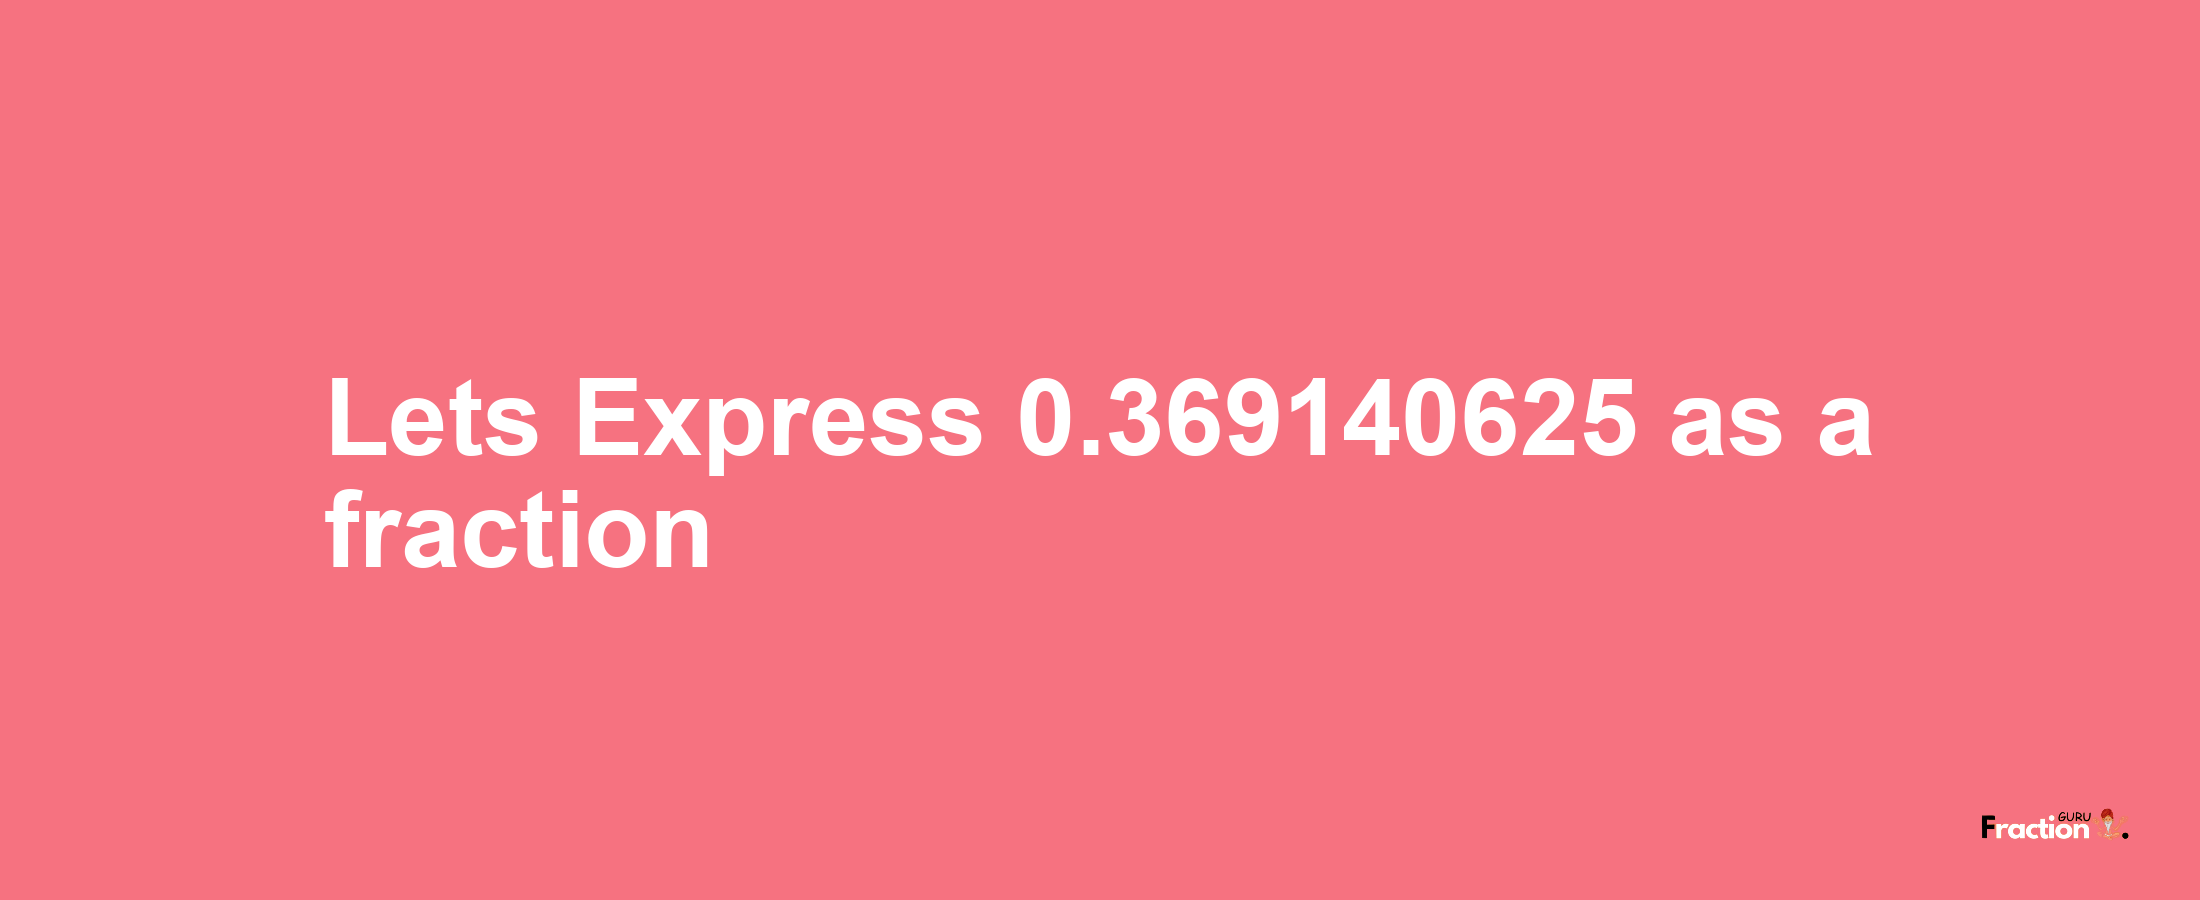 Lets Express 0.369140625 as afraction